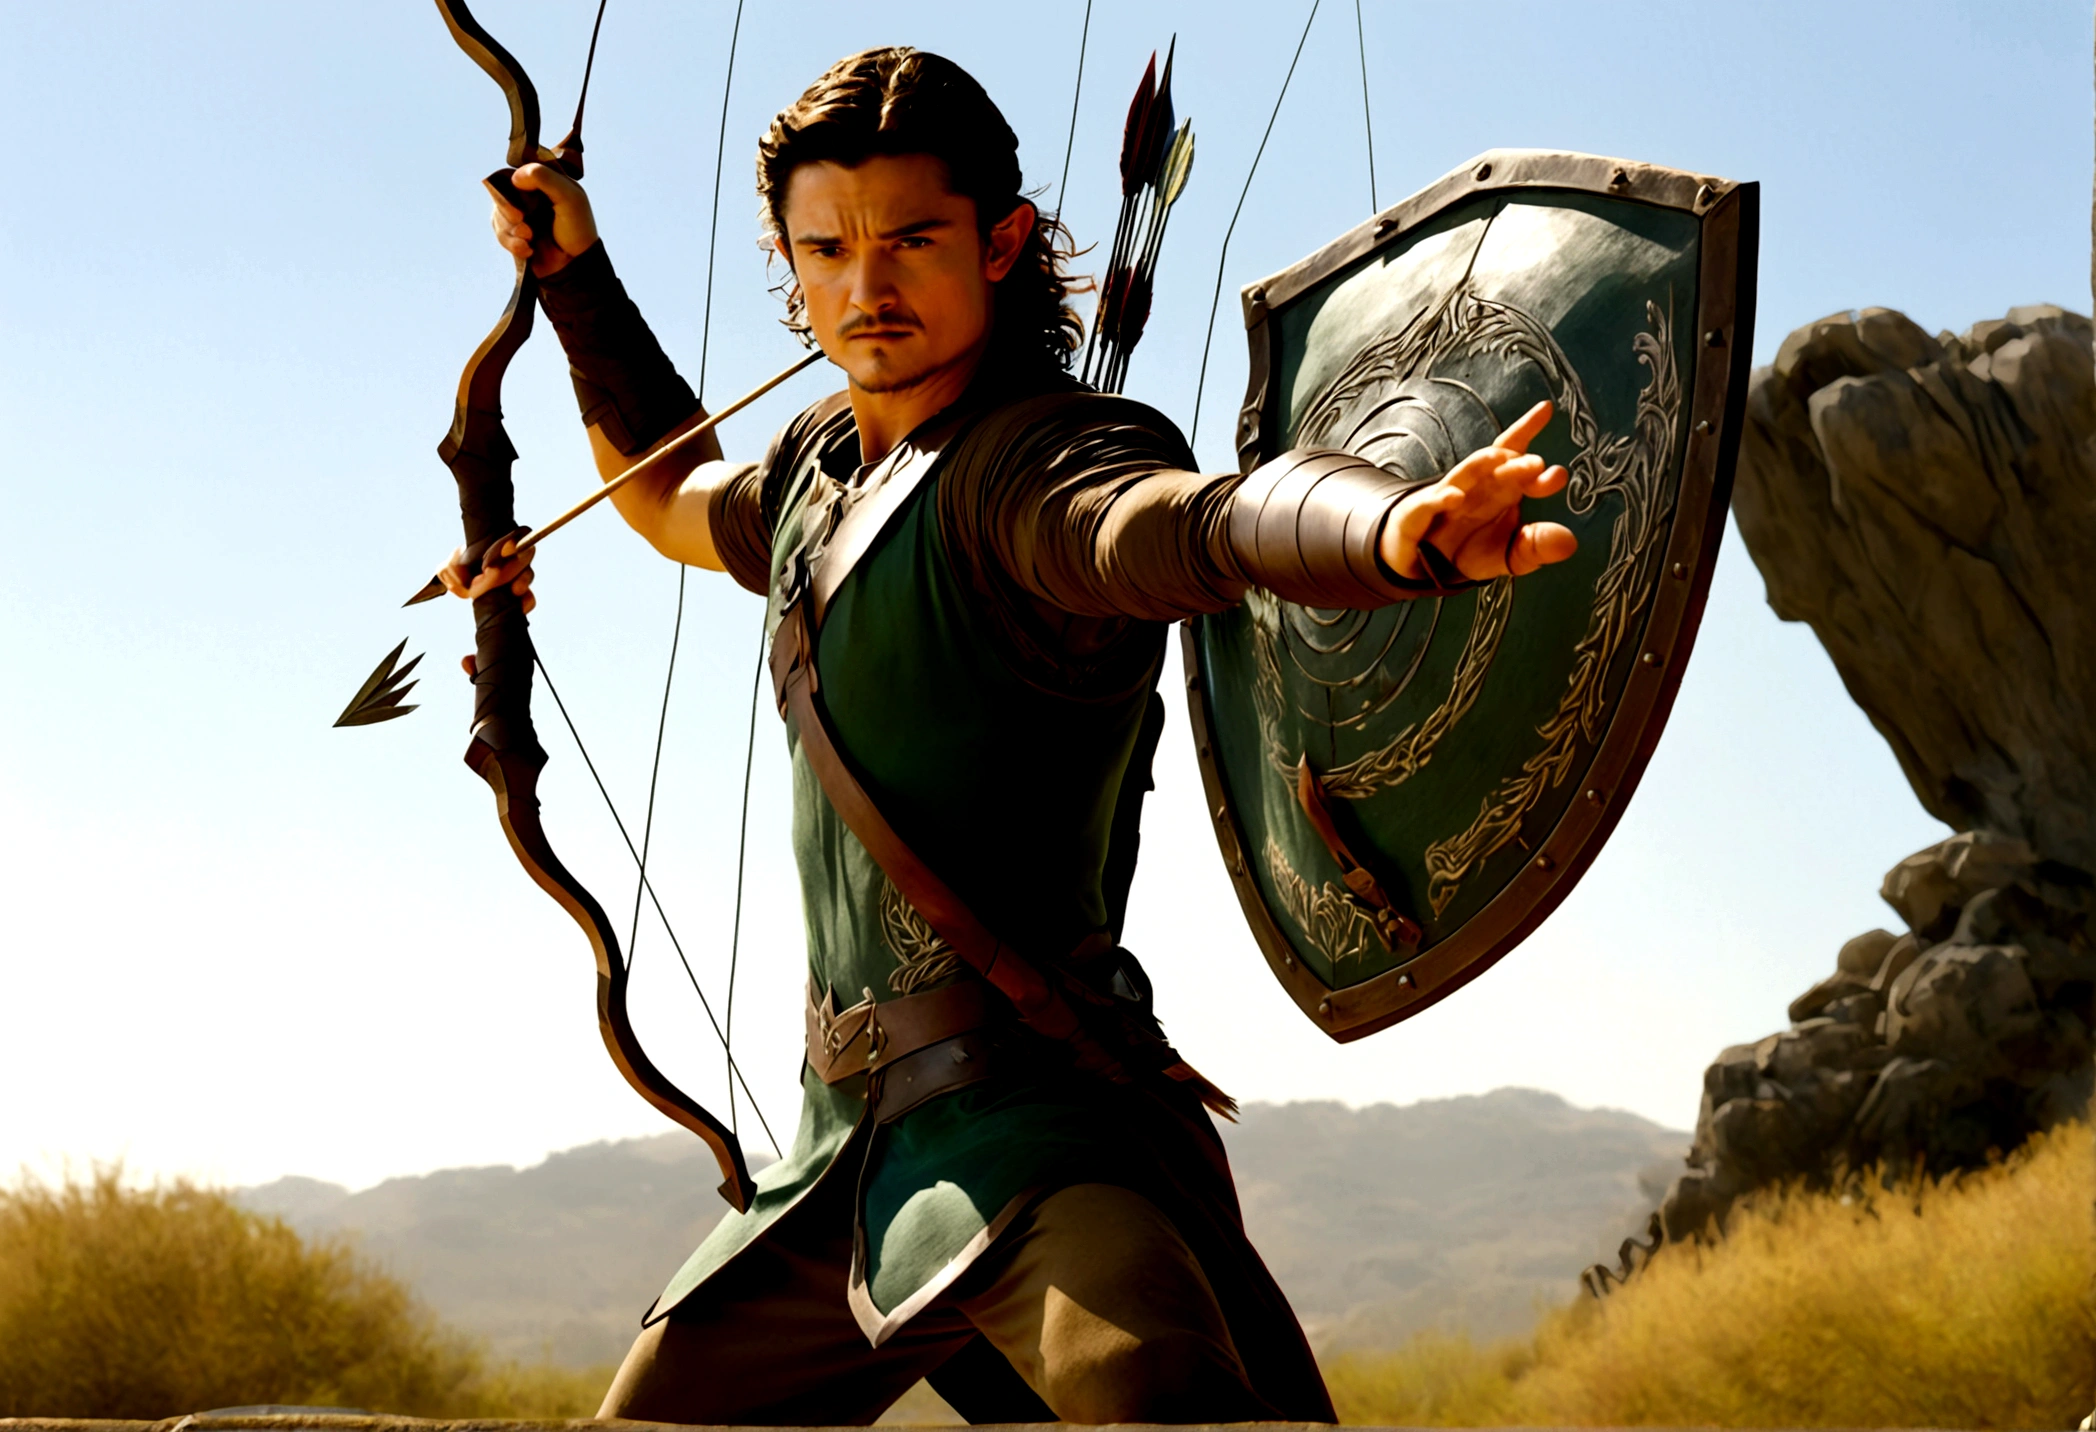 Orlando Bloom (2008, Link Costume, bow and arrow, shield on back) heroic pose, monster in distance
